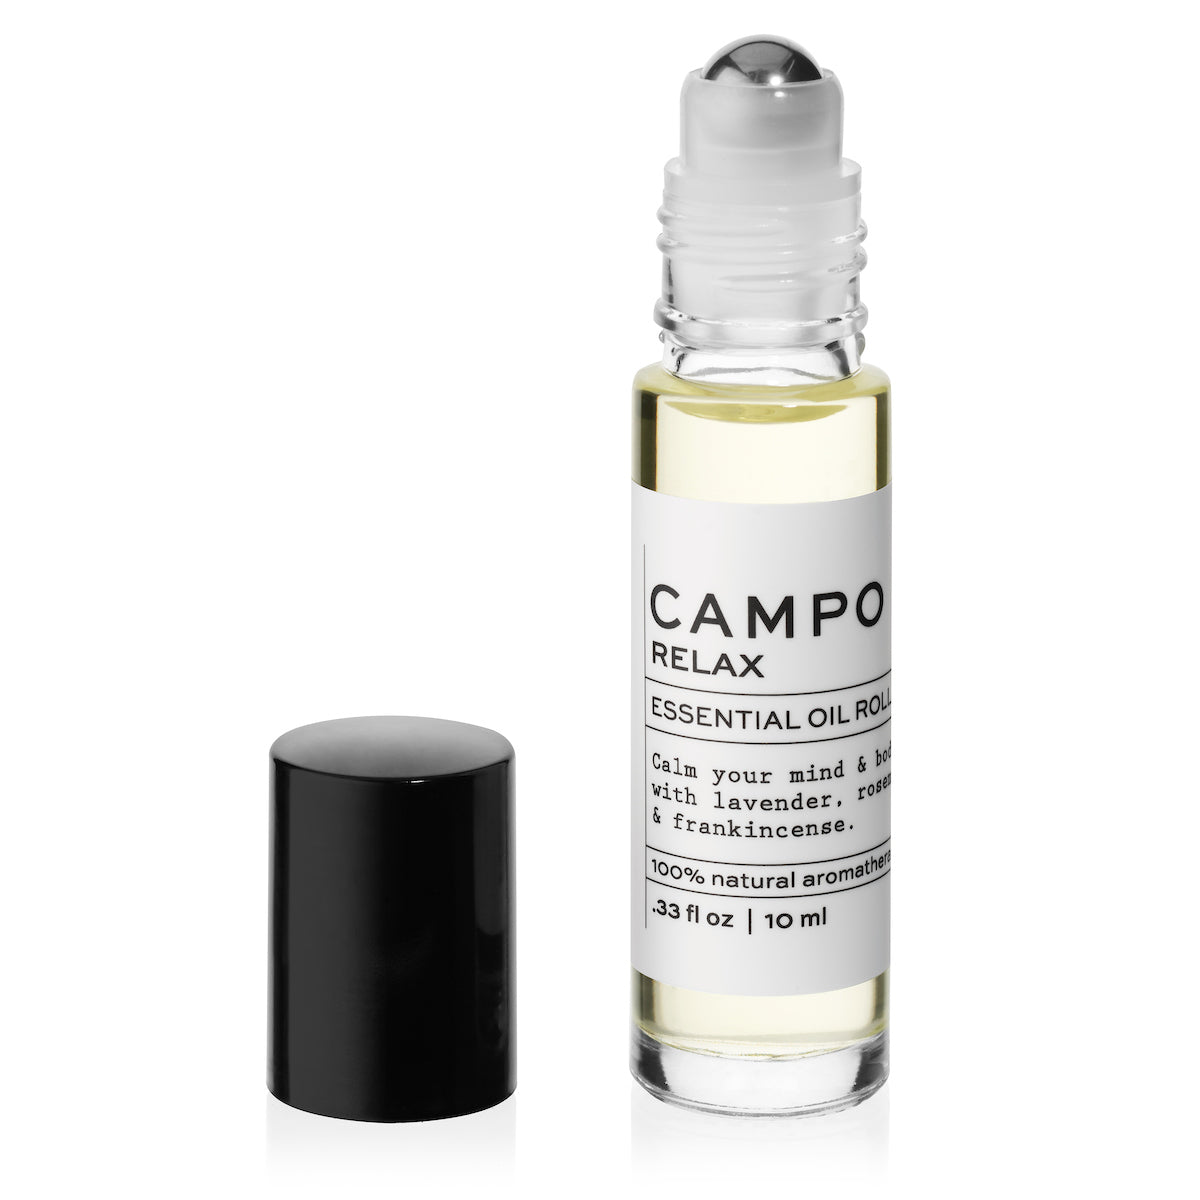 Campo Beauty Essential Oil RELAX Stretch Mark Relief Blend Roll-On that in 10 ml. Soothe sore muscles and pain. Dispels feelings of stress and anxiety to promote deep relaxation. Calm your mind and body naturally with this 100% natural essential oil roll-on blend of Lavender, Rosemary, Frankincense, Neroli Orange Blossom, Sweet Orange, and Bitter Orange.